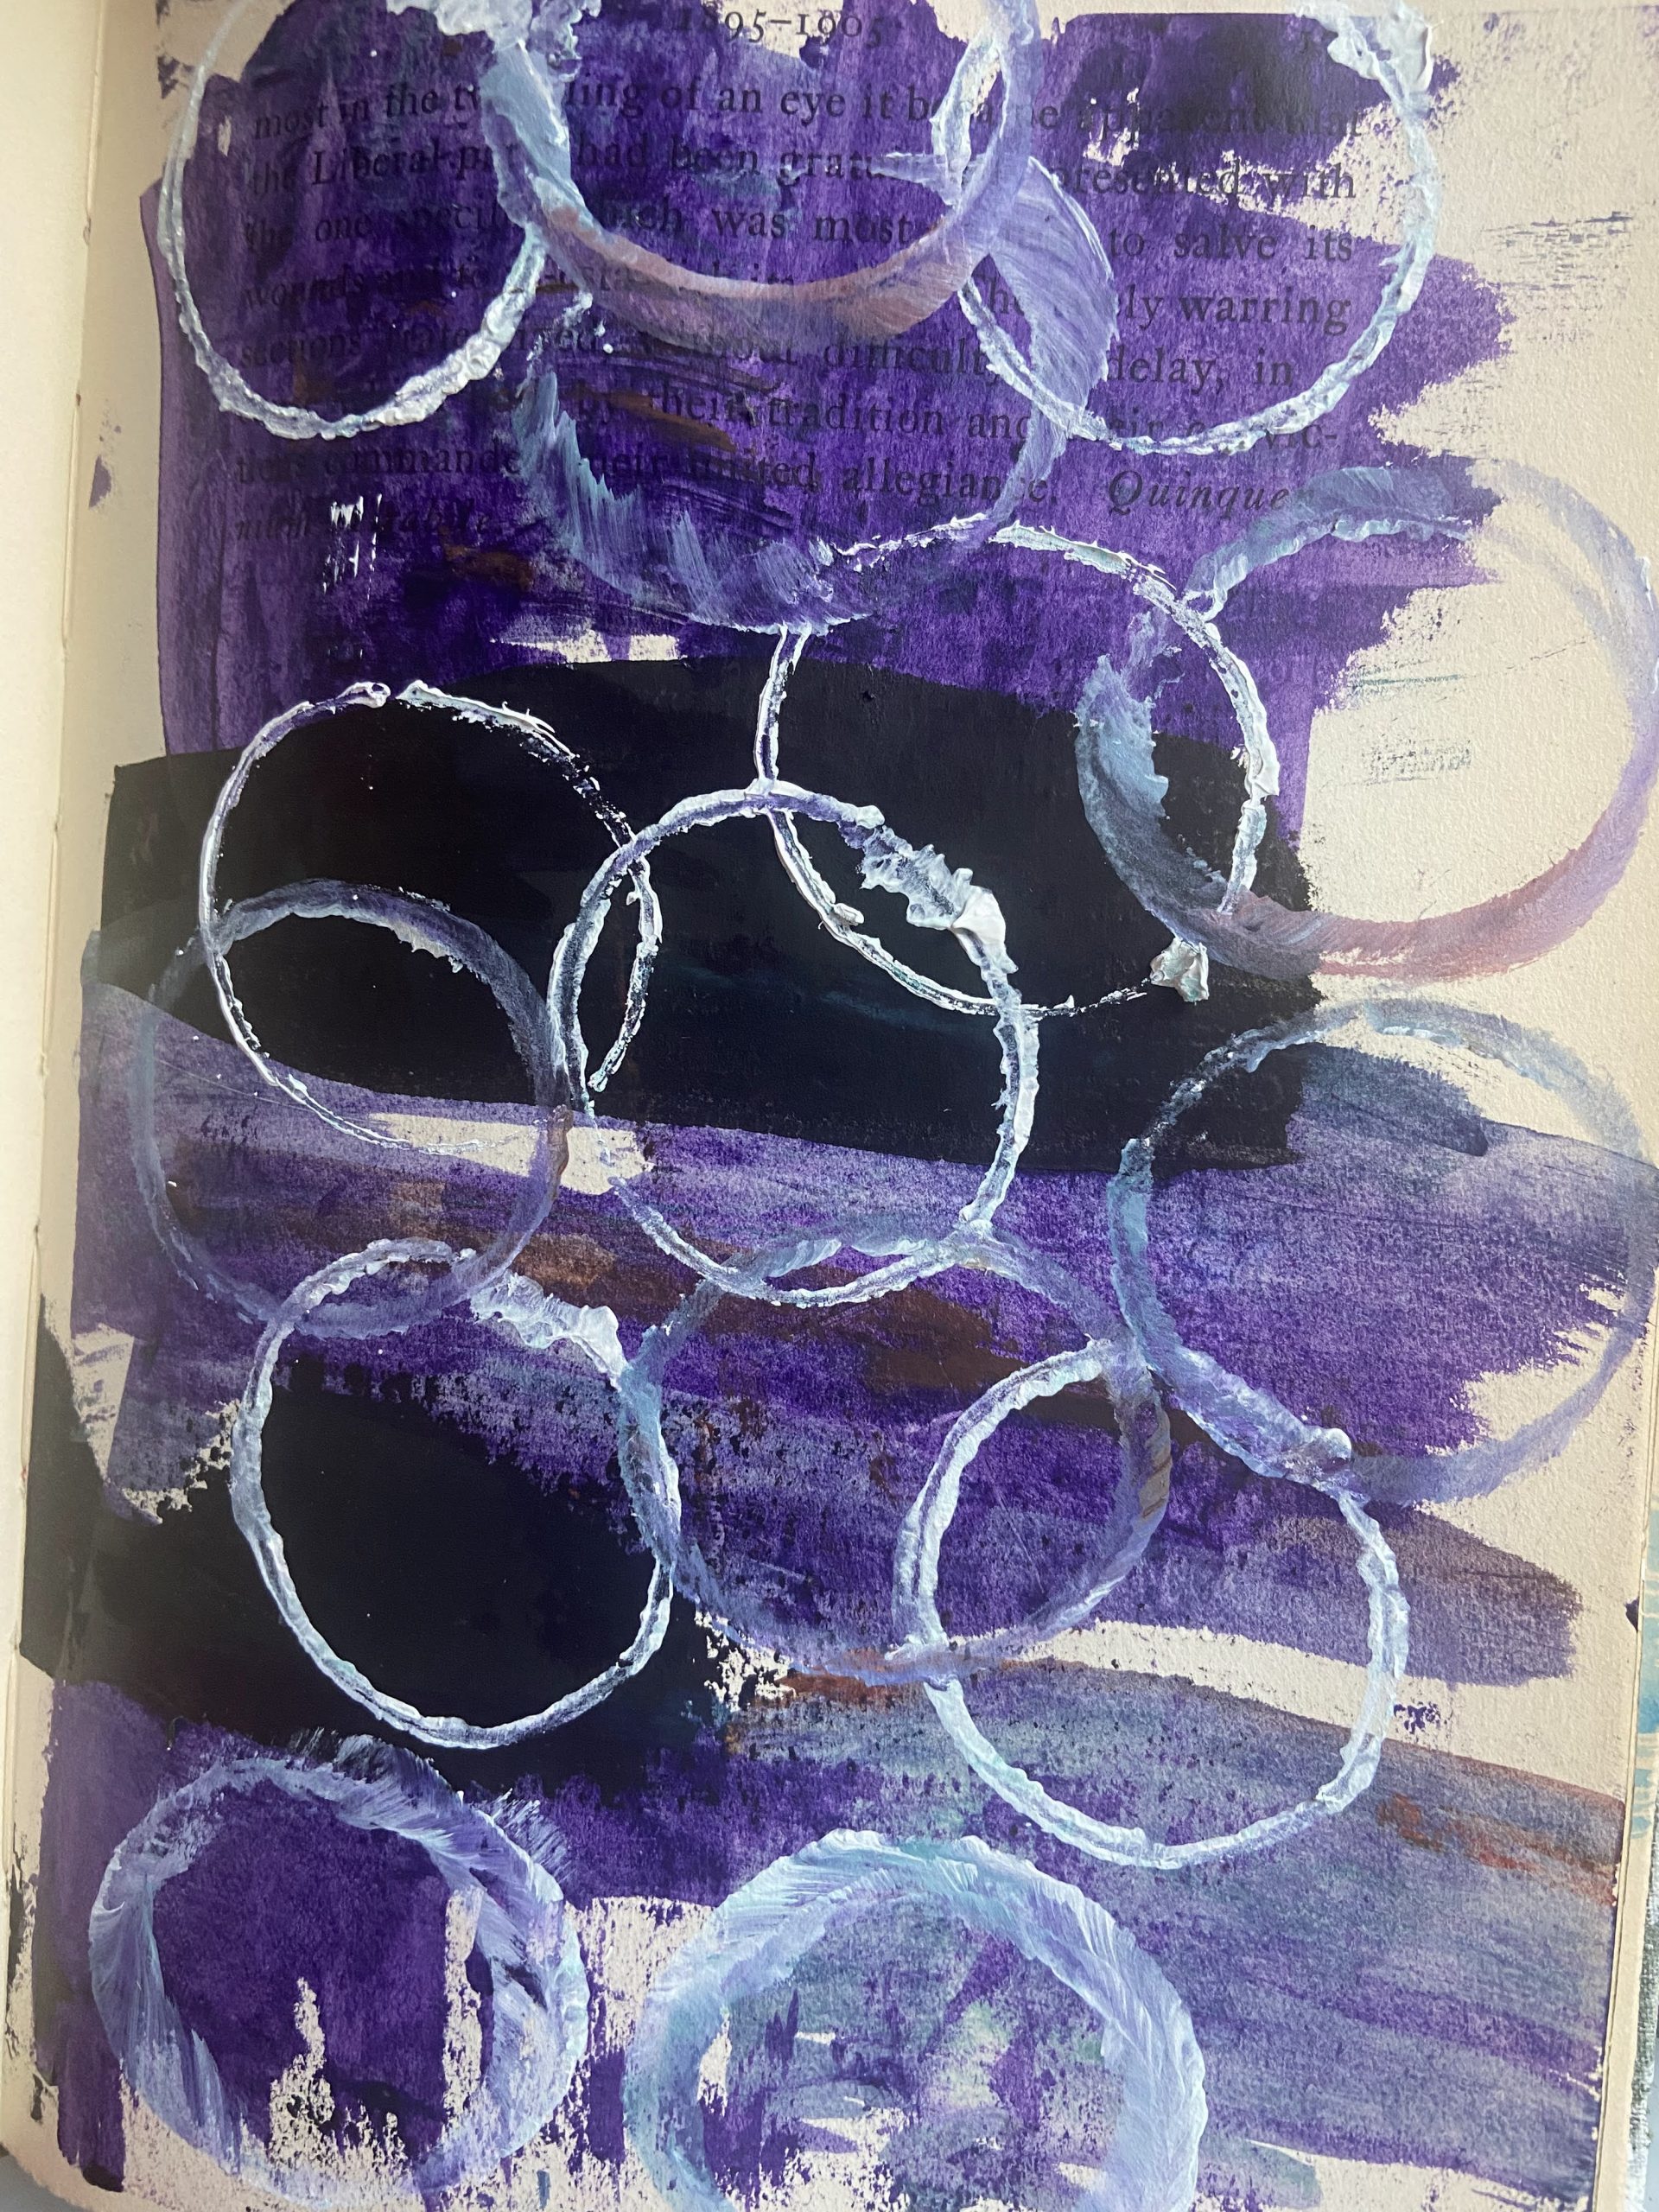 Mark making in an old book done with acrylic paint and using a toilet paper roll to make circles.